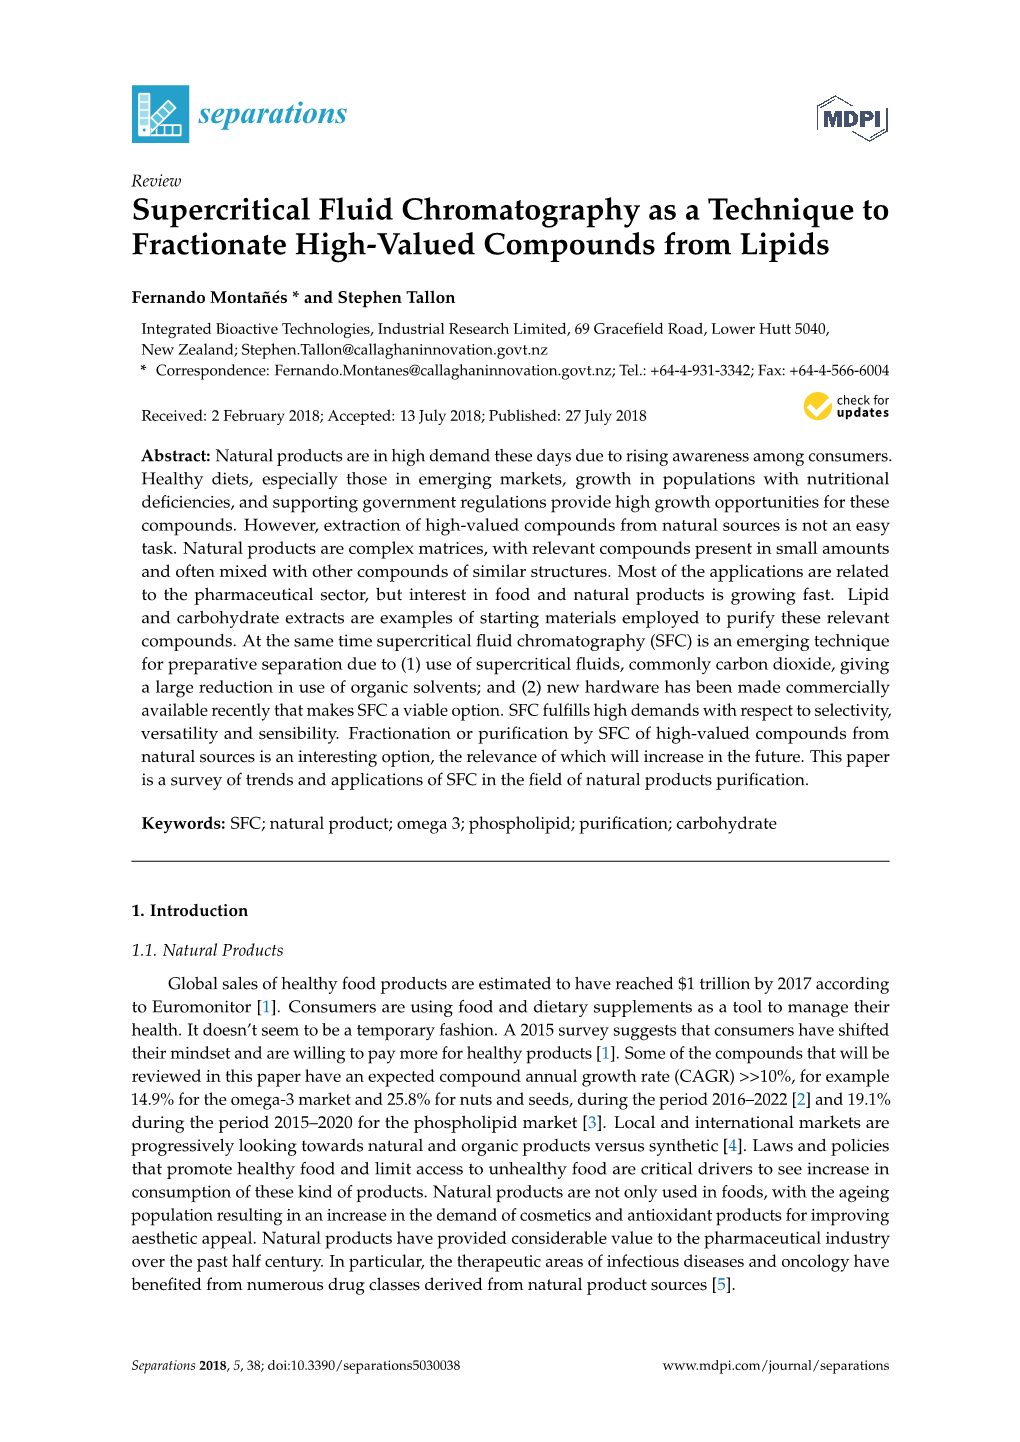 Supercritical Fluid Chromatography As a Technique to Fractionate High-Valued Compounds from Lipids